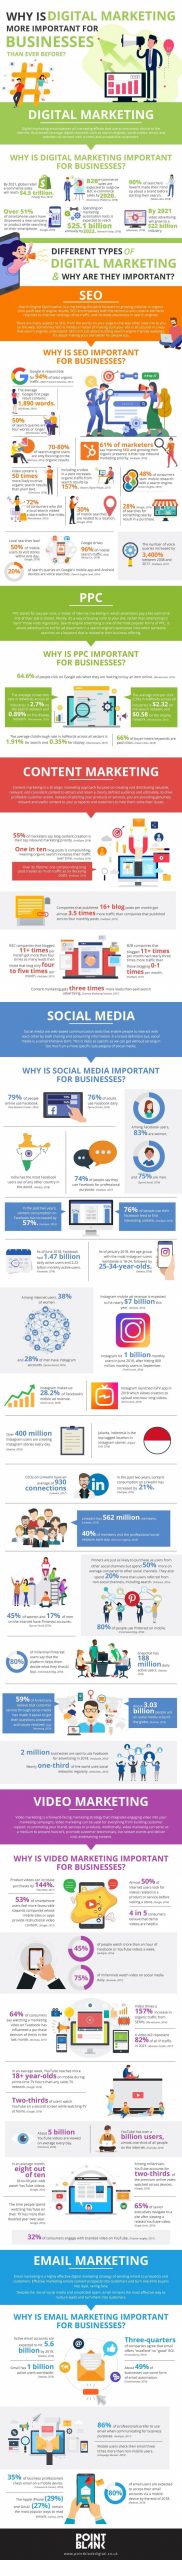 , Why is Digital Marketing so Important for Business in 2019? [Infographic], TornCRM